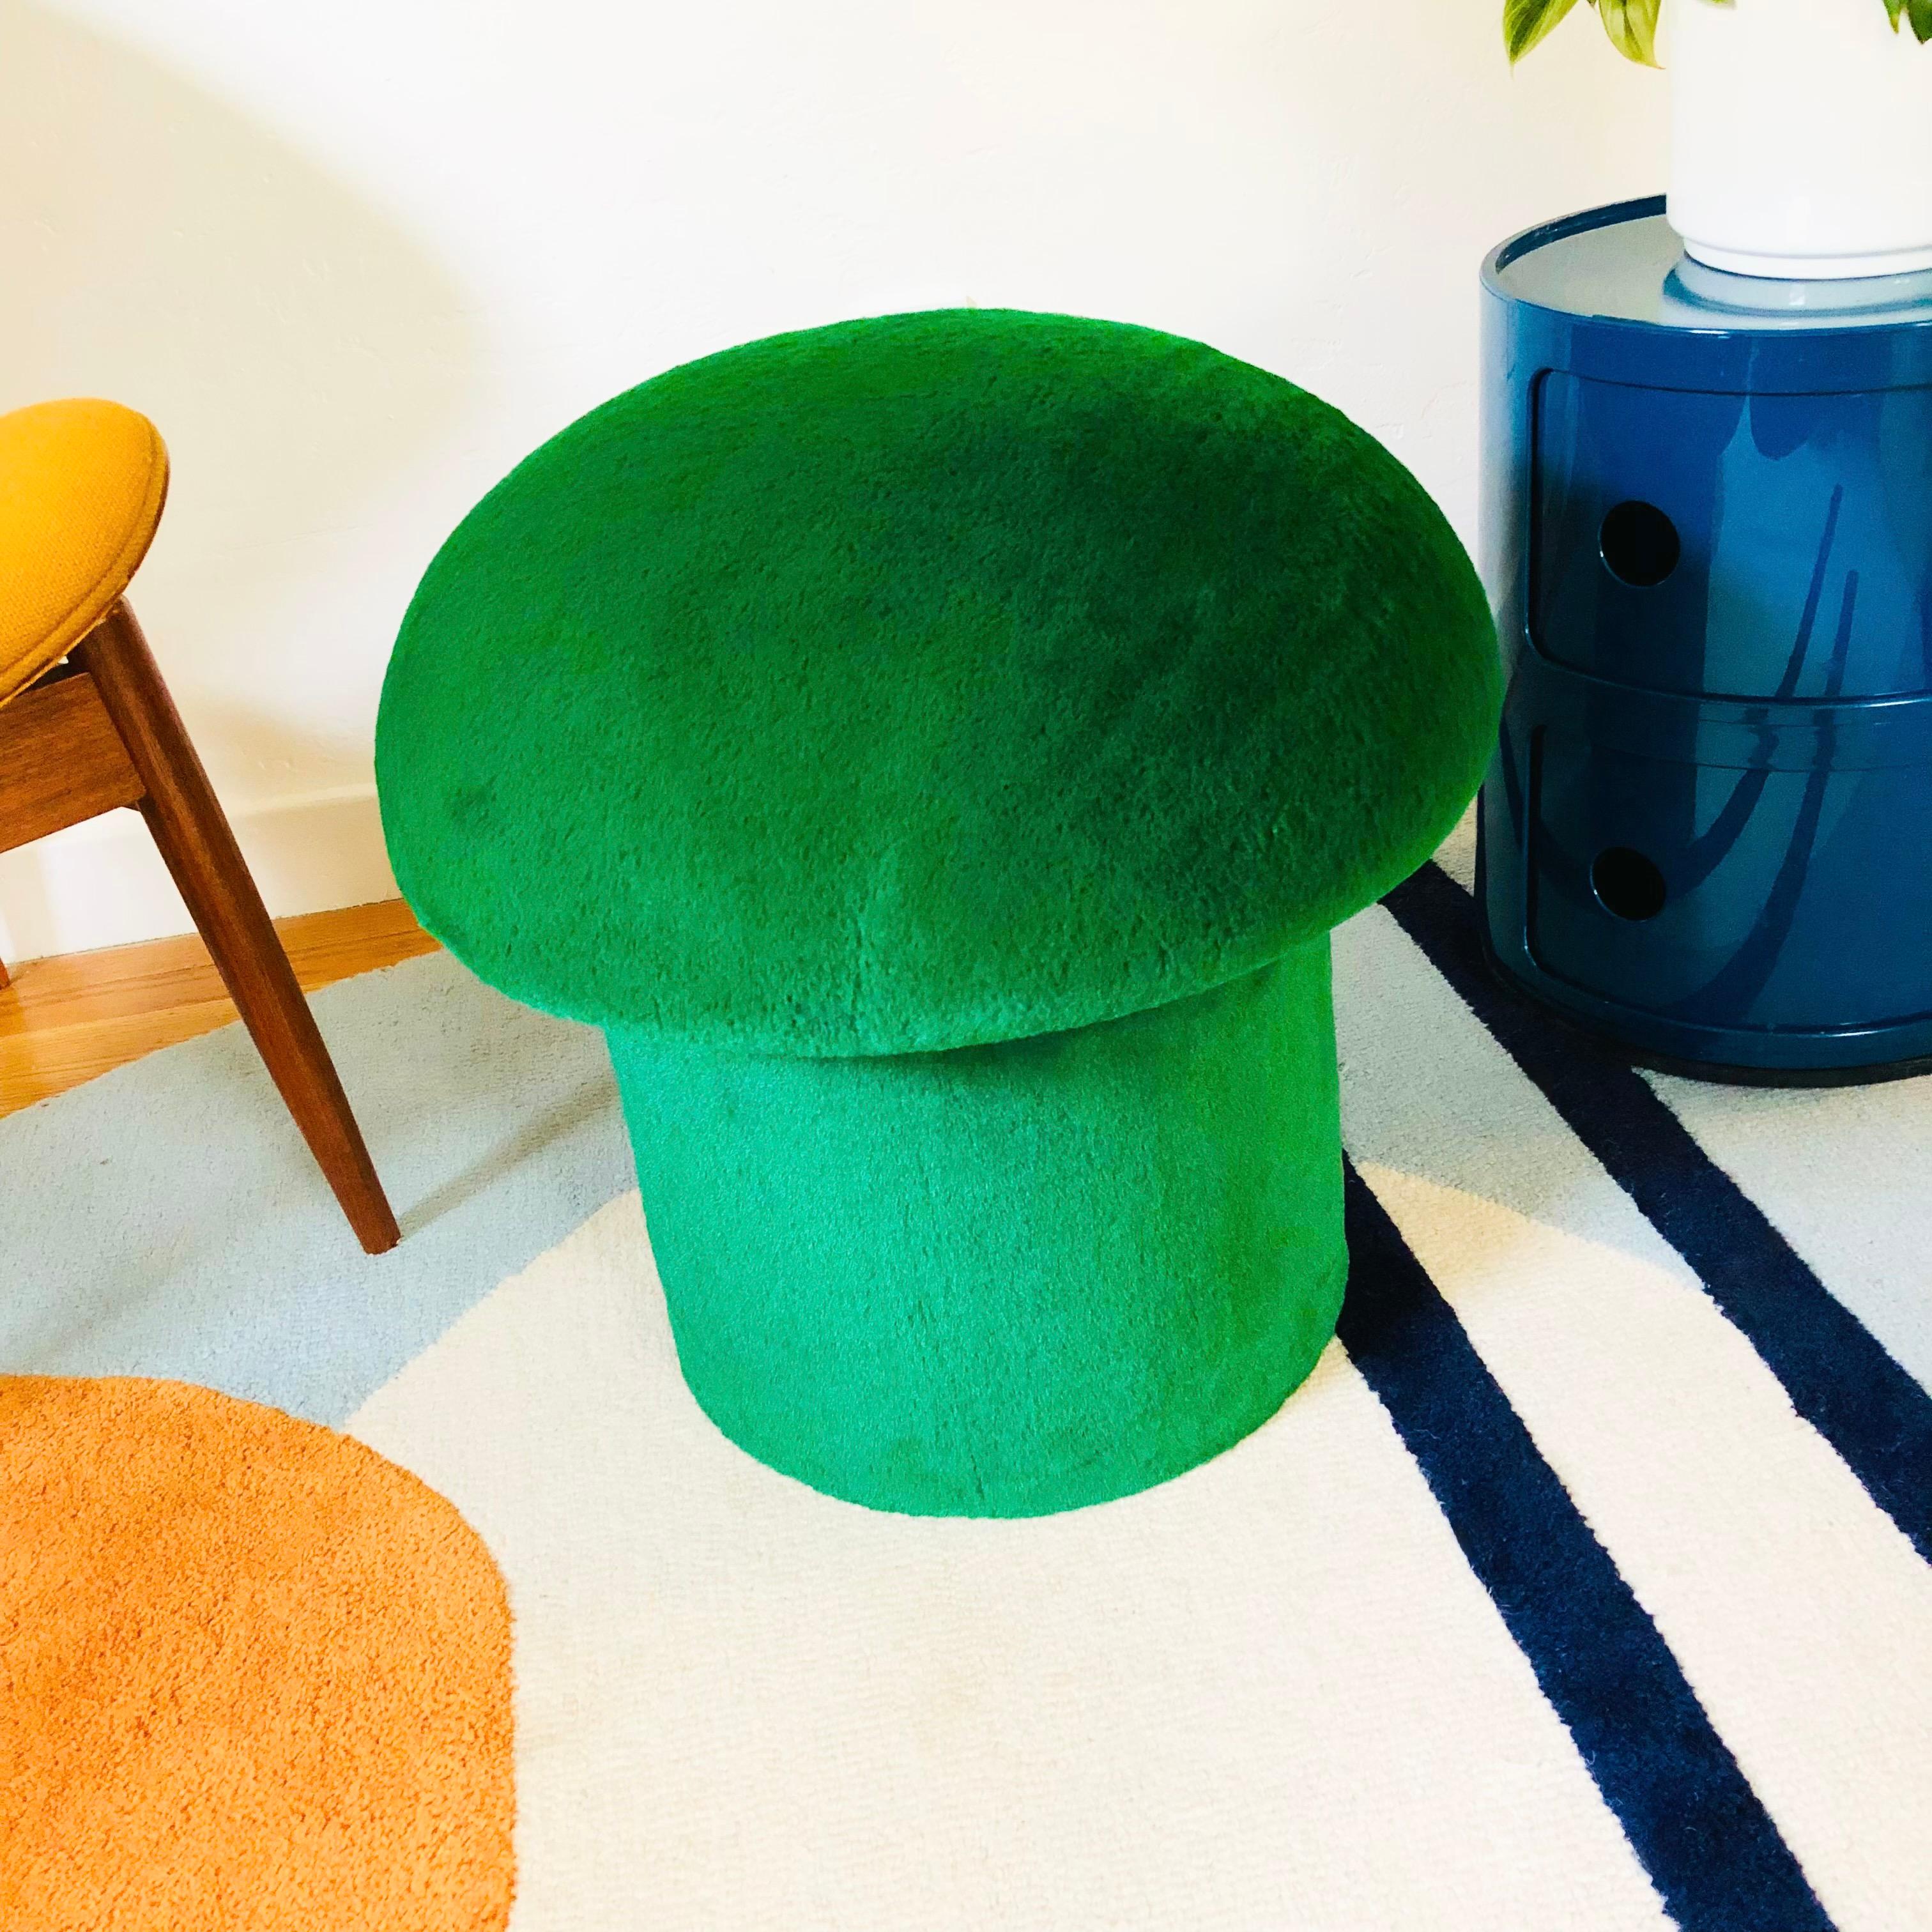 A handmade mushroom shaped ottoman, upholstered in an emerald colored high pile plush fabric. Perfect for using as a footstool or extra occasional seating. A comfortable cushioned seat and sculptural accent piece.
PLEASE NOTE:
Color variations may